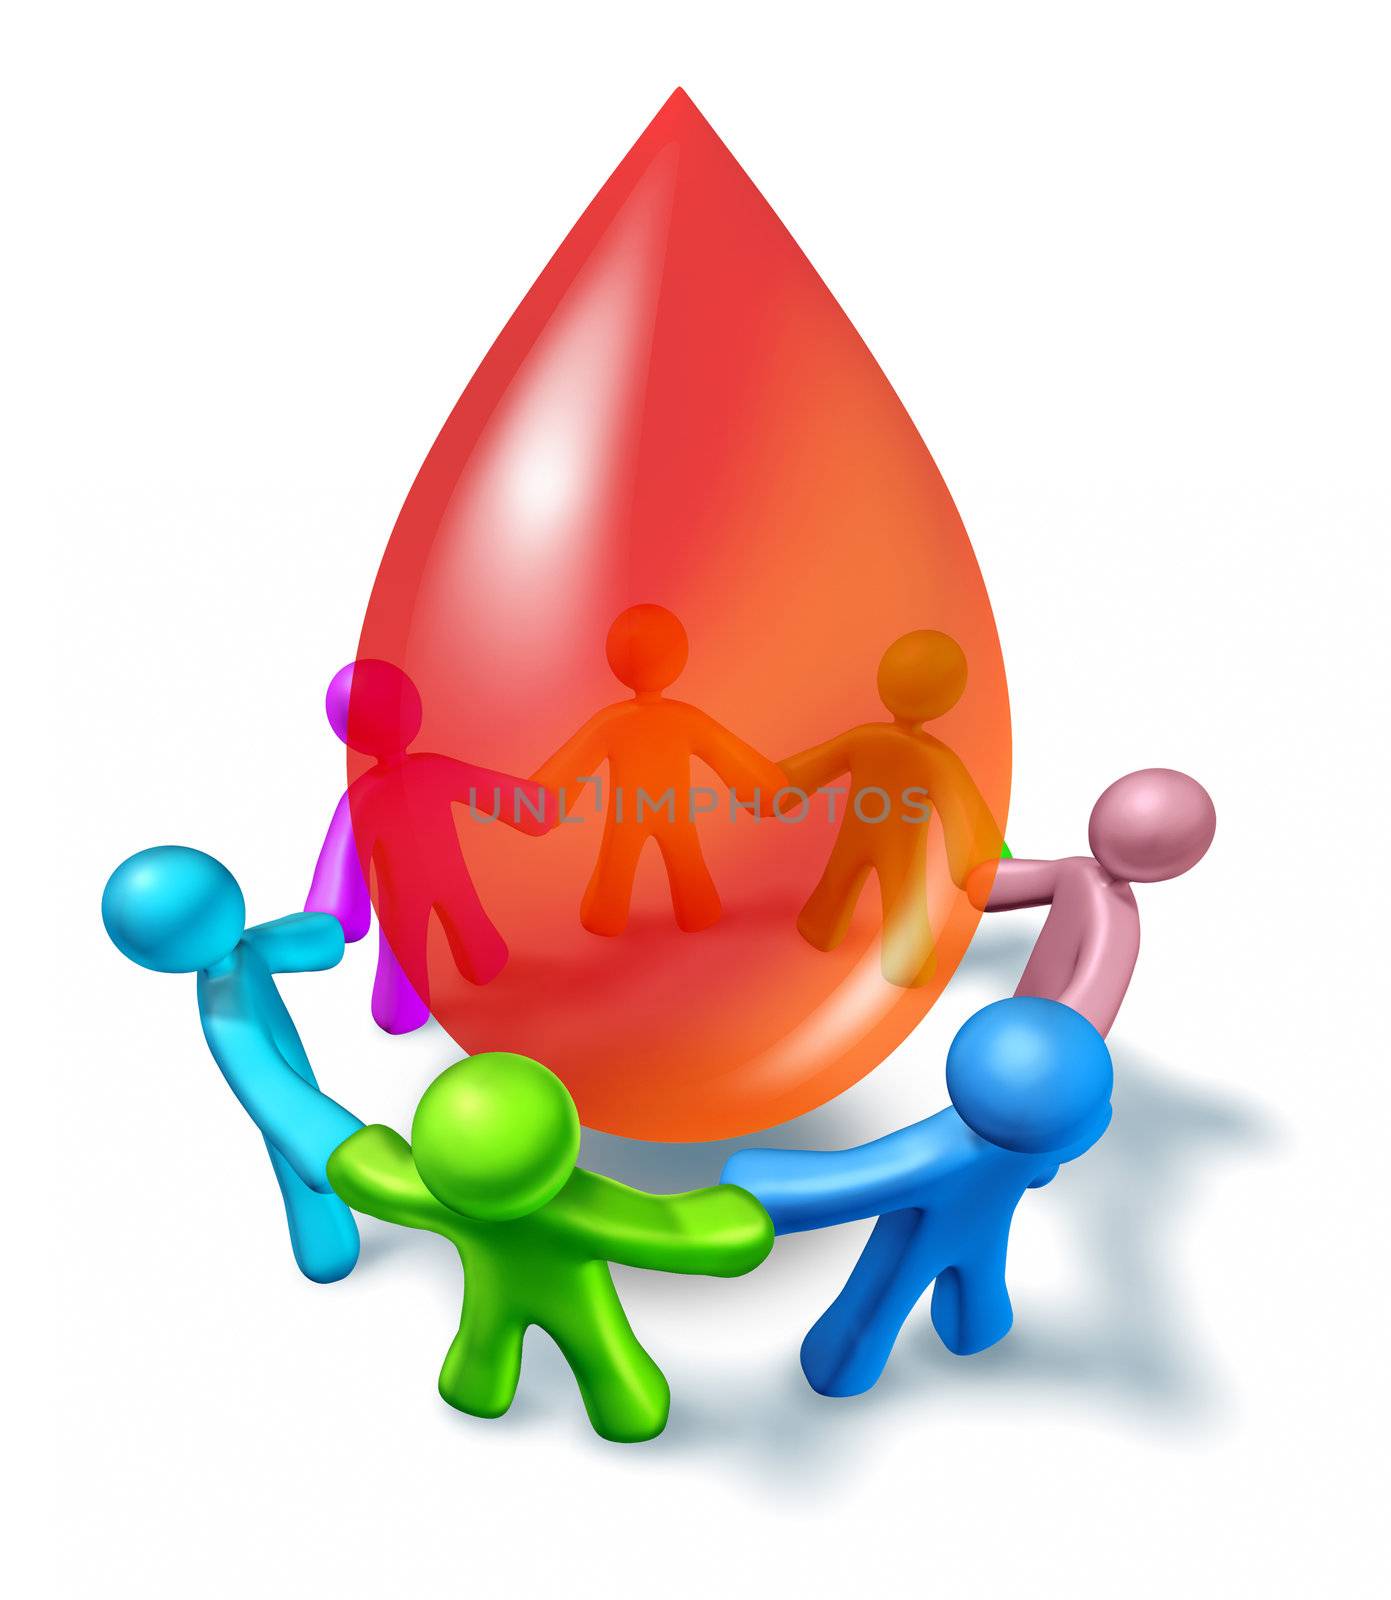 Blood donation with a diverse community coming together as a charity event for giving and donating a life giving gift with people holding hands around a three dimensional red drop on a white background.